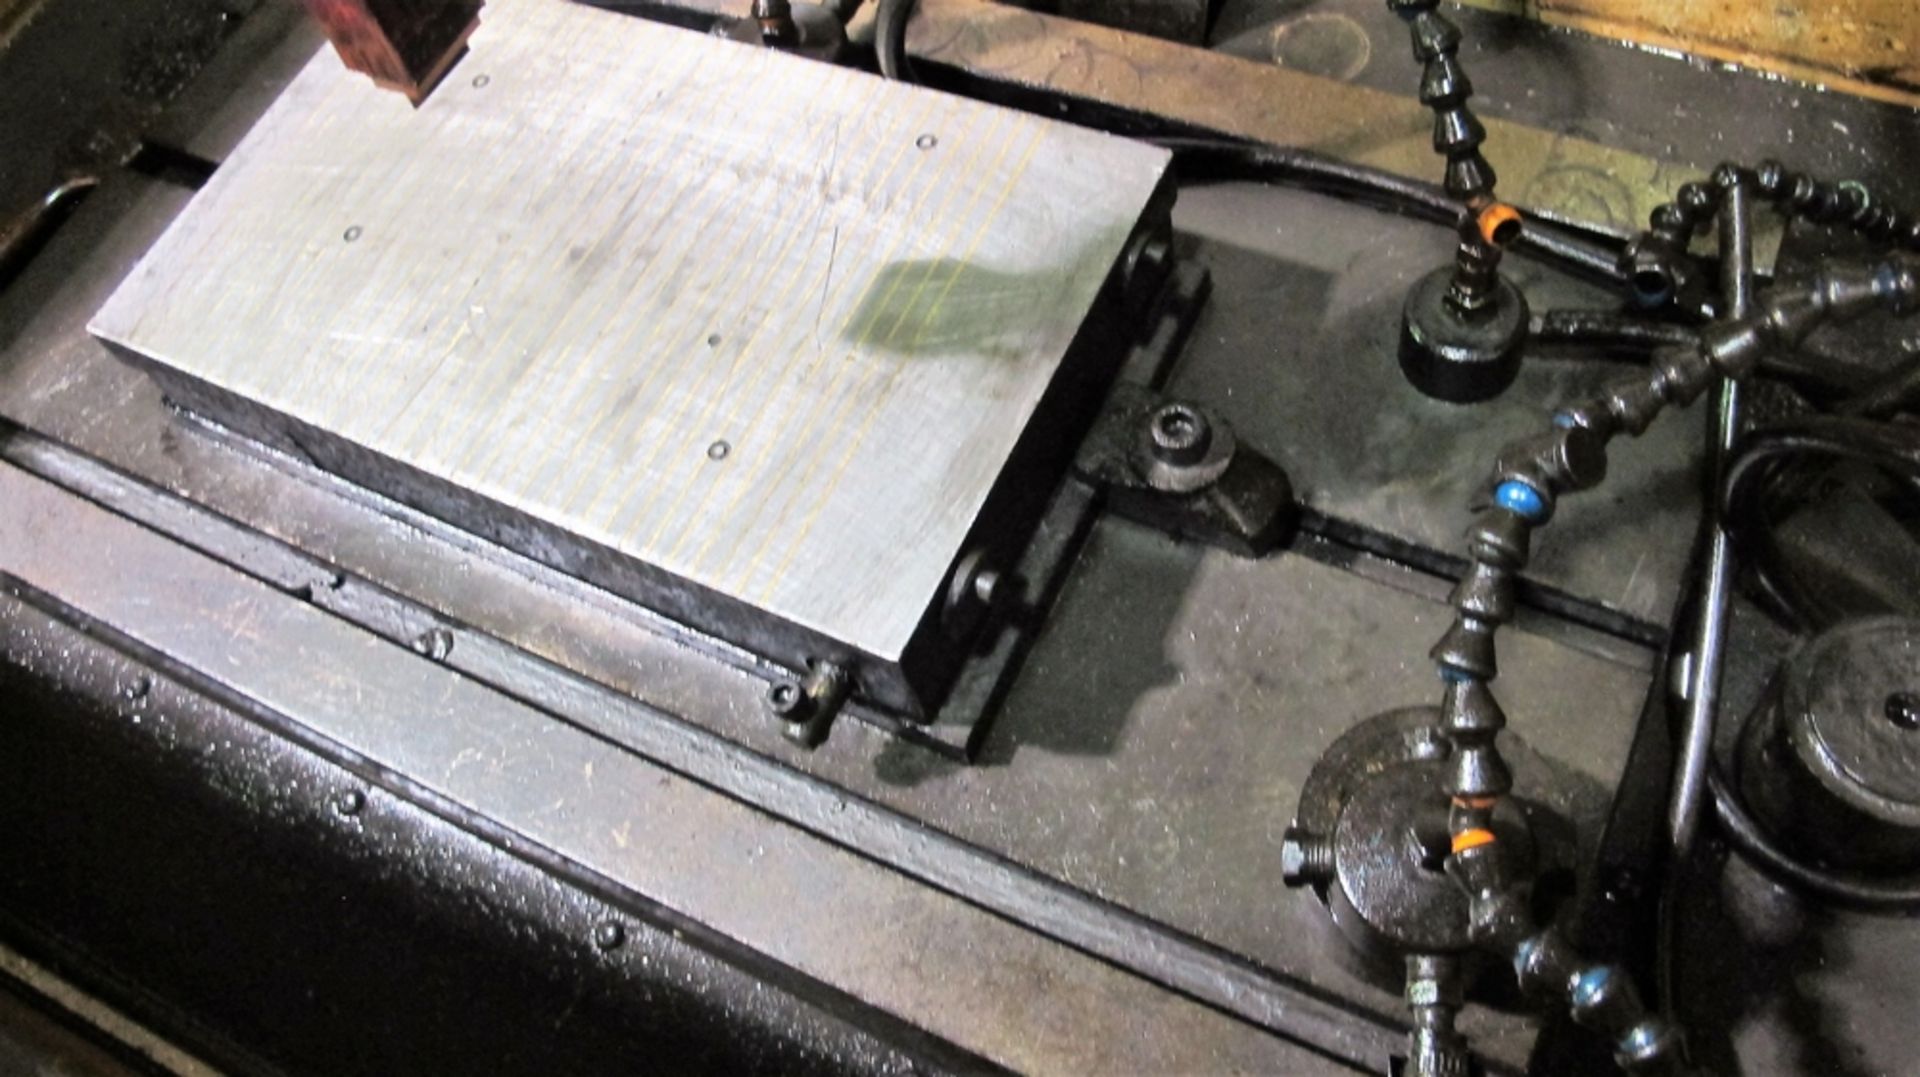 SURE FIRST ZPNC-408 SINKER TYPE EDM, CNC CONTROL, S/N 0042431, 27" X 16" TABLE, MAGNETIC SURFACE - Image 4 of 6